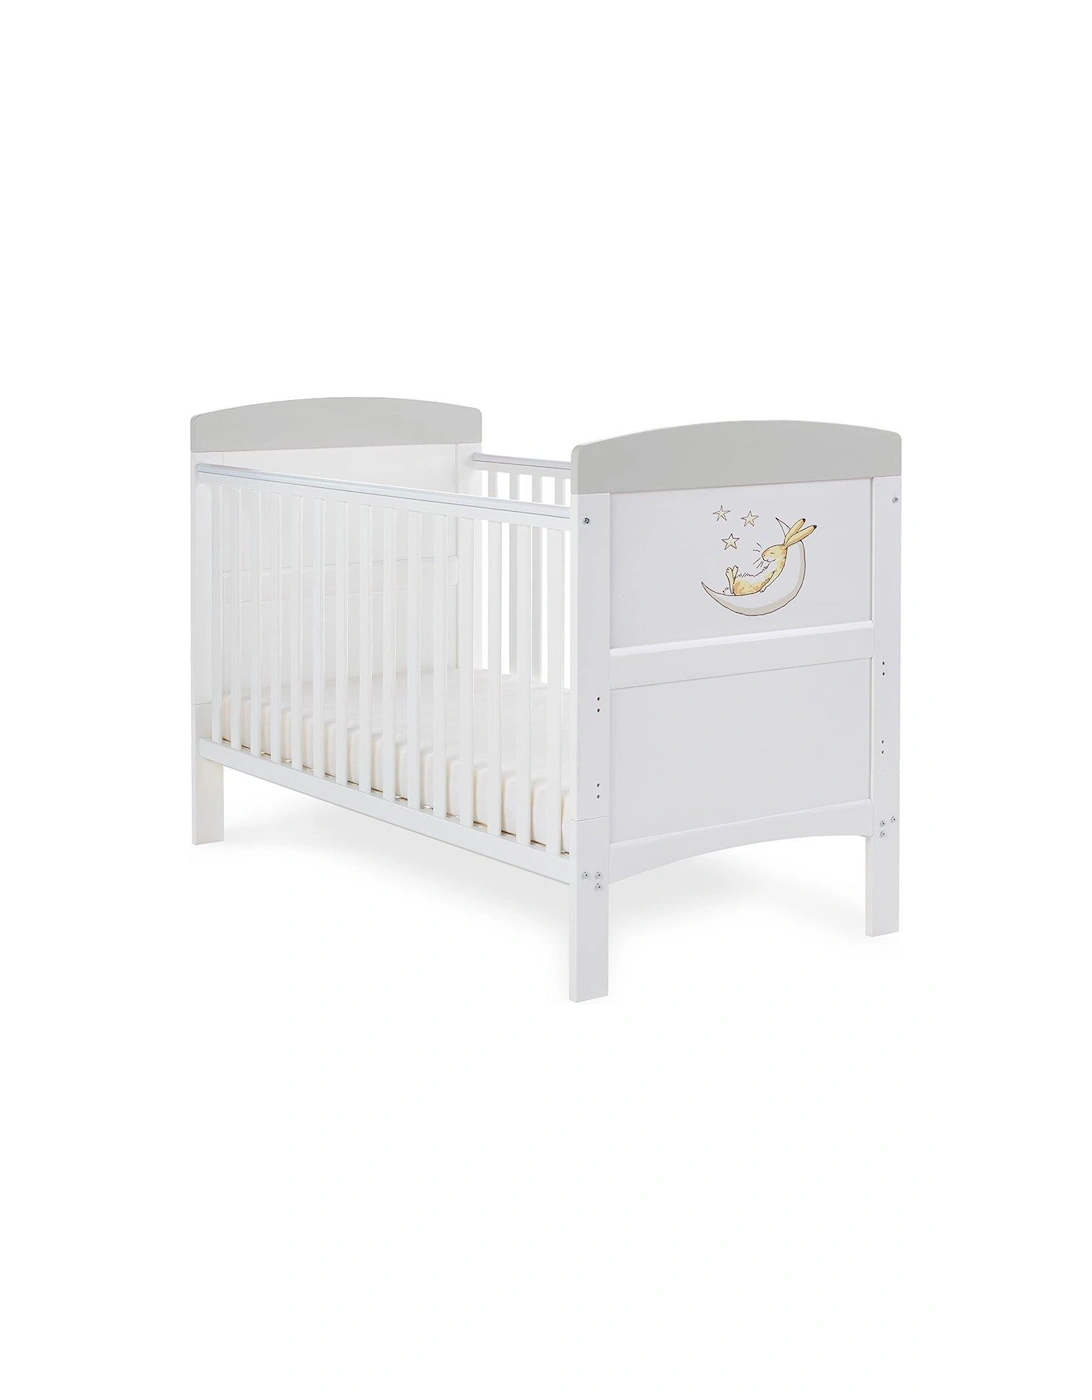 Guess How Much I Love You Cot Bed - To the Moon & Back, 3 of 2